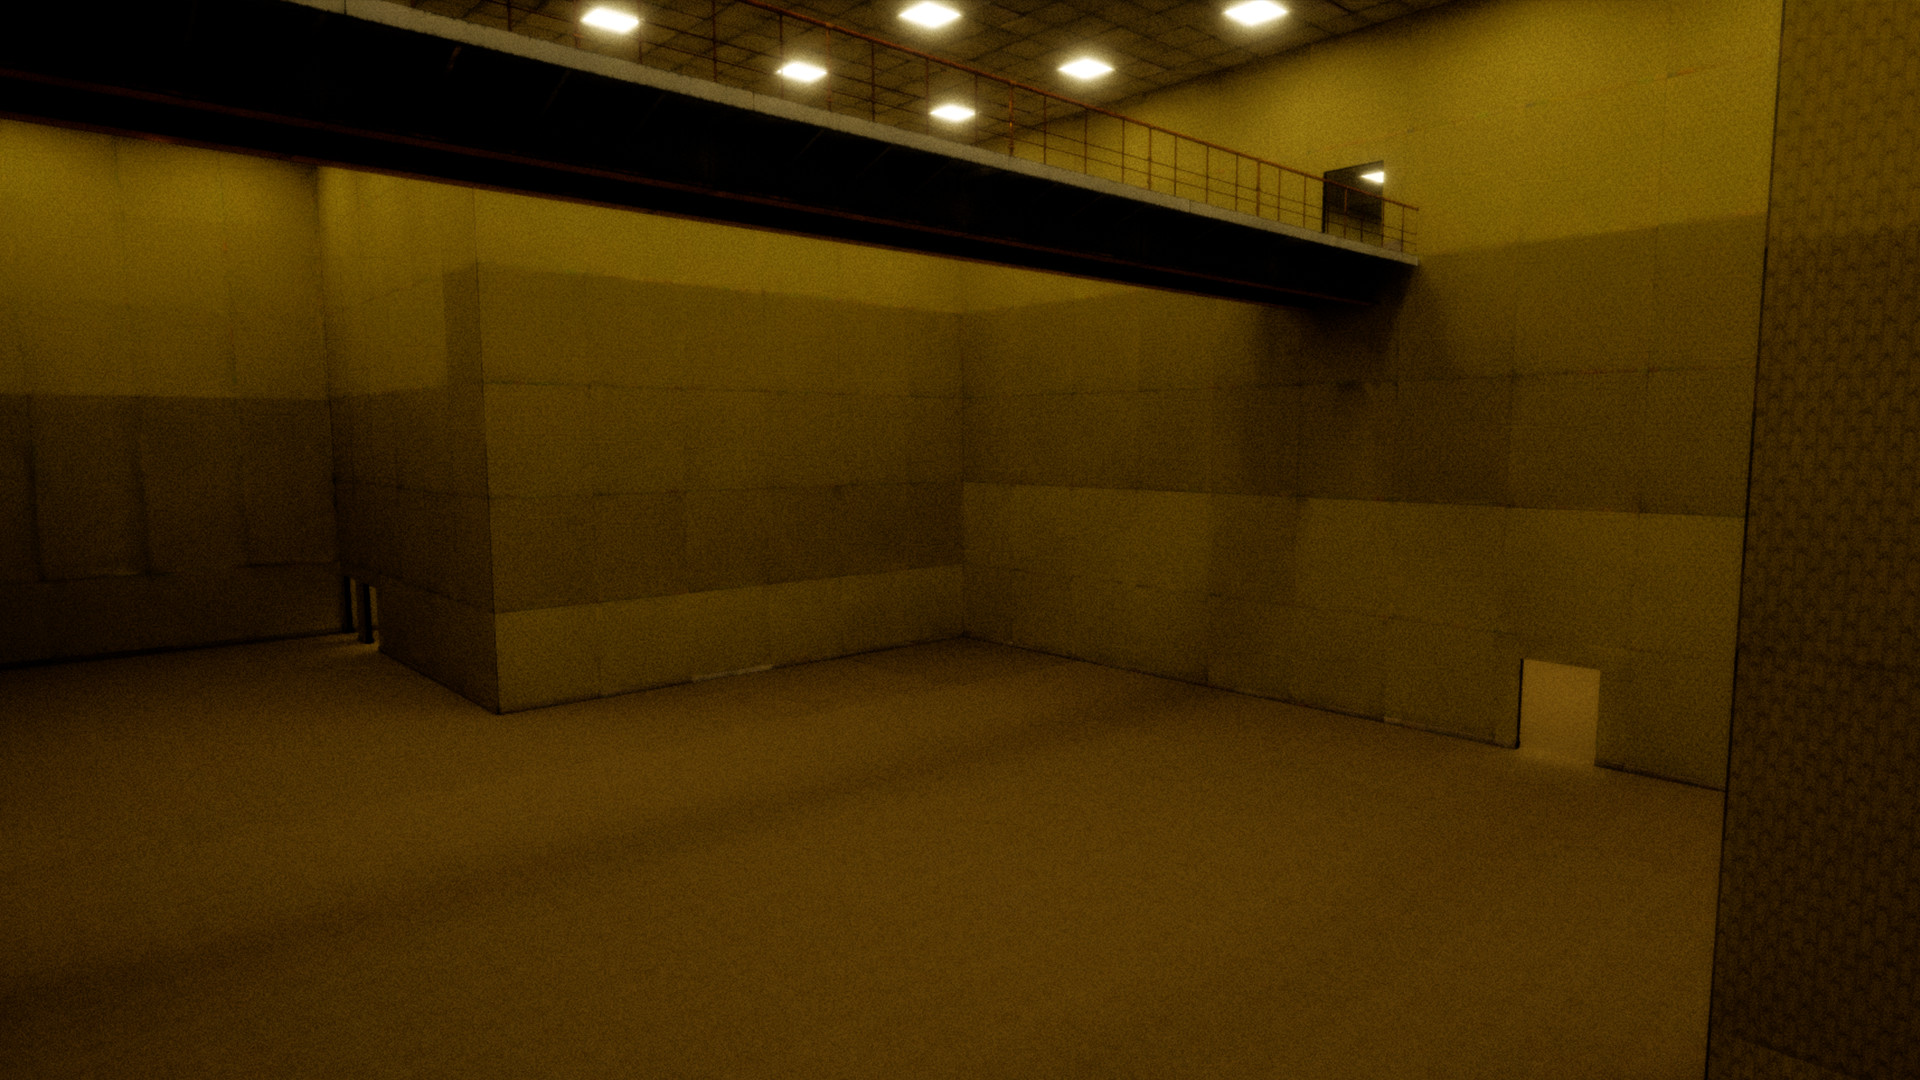 I am working on a Backrooms game, where you can destroy everything and  break your way out. Procedural labyrinth, original 6 mil square miles. It's  called Backrooms Break, made in Unreal Engine